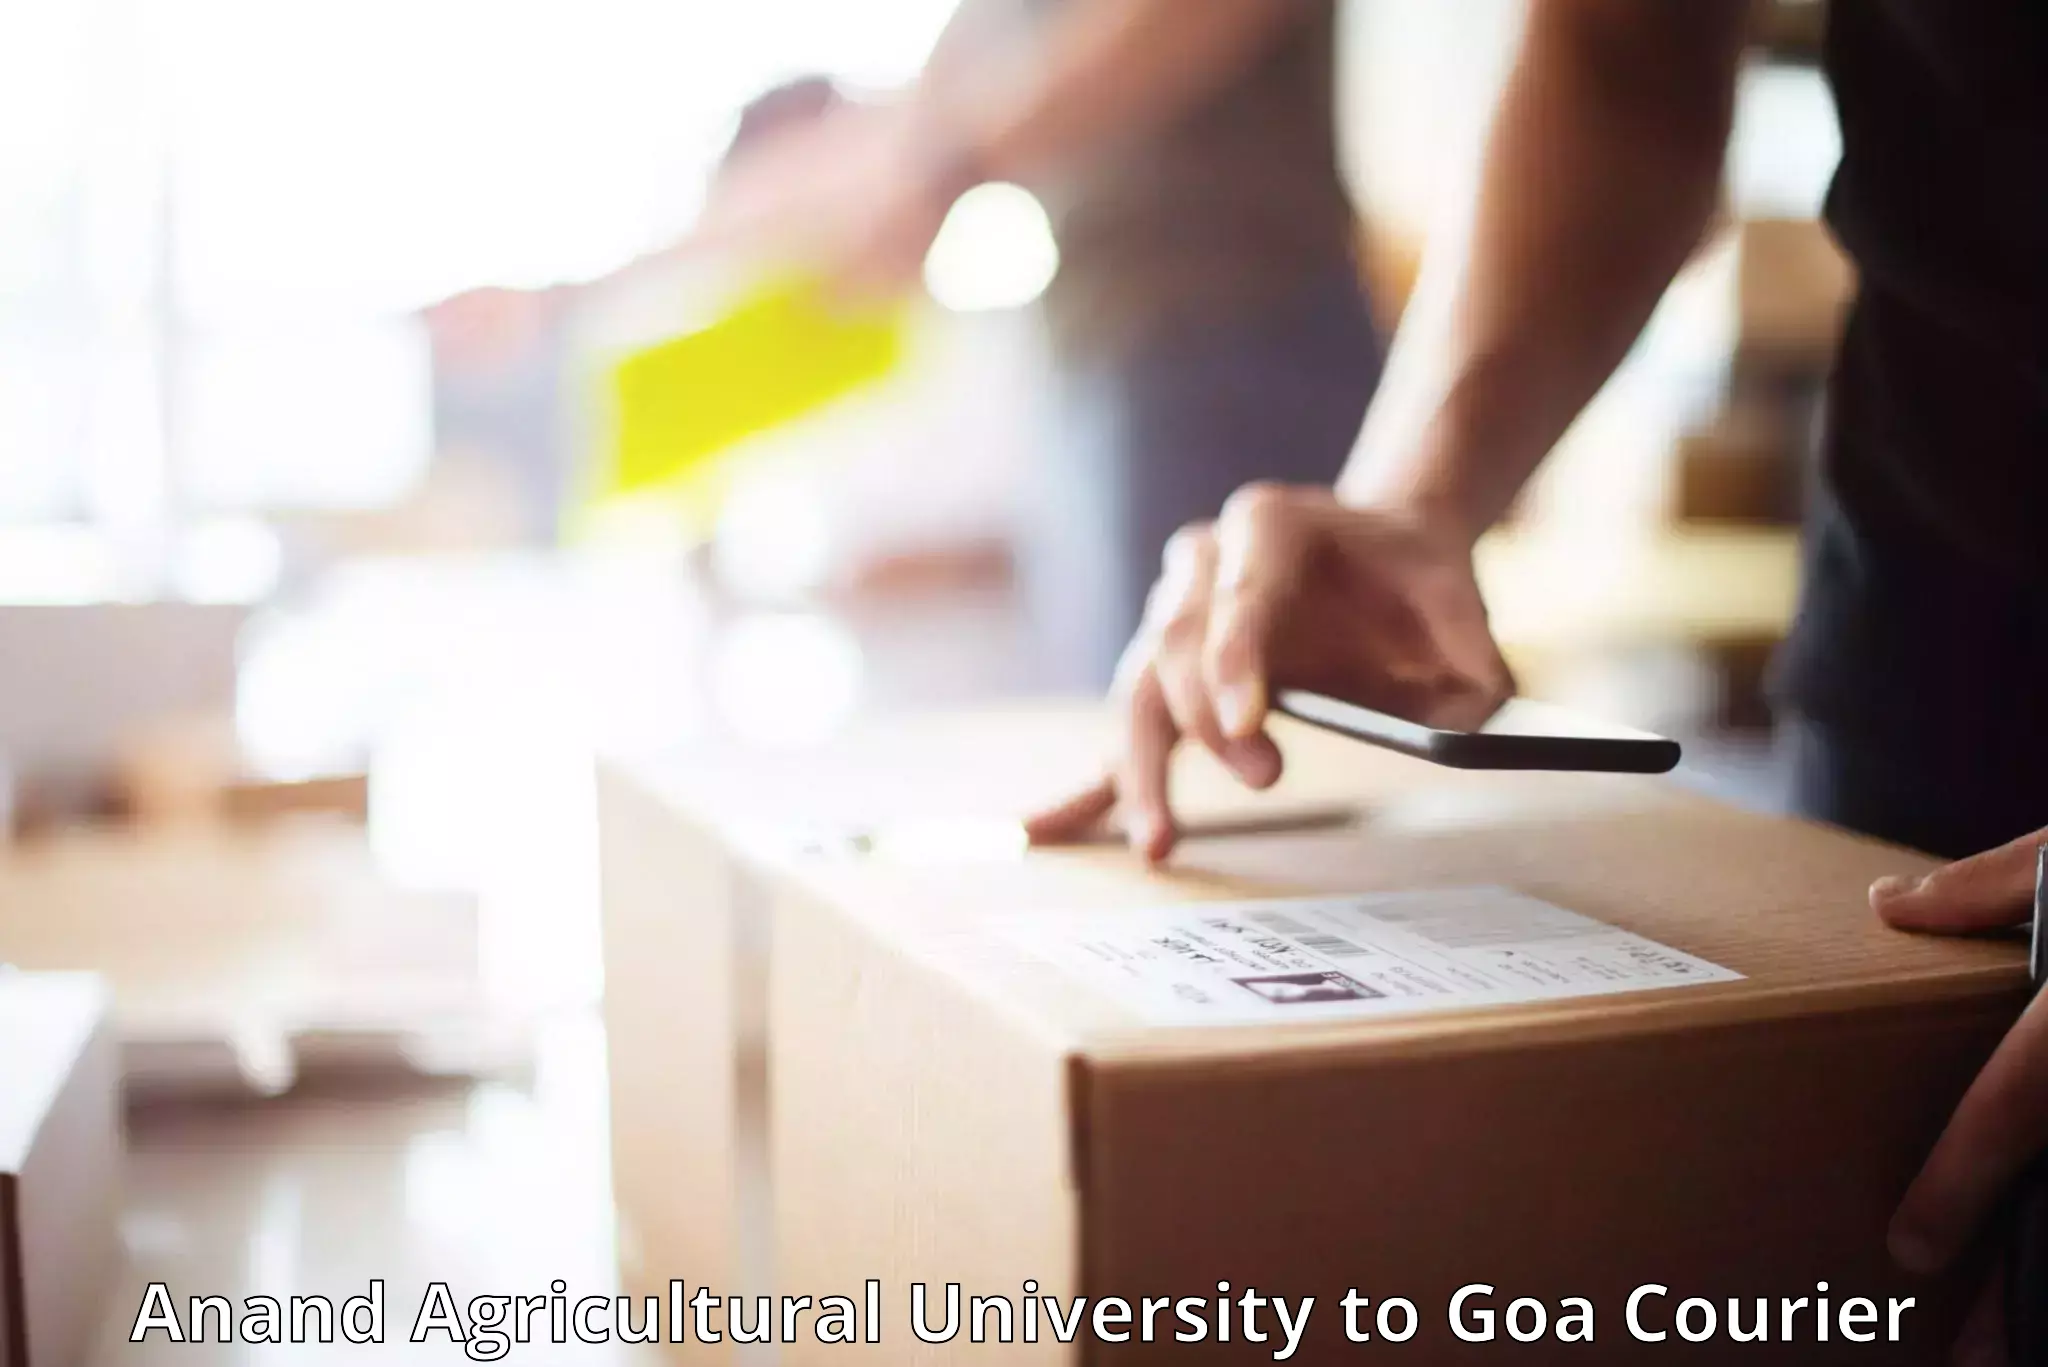 Baggage relocation service Anand Agricultural University to Vasco da Gama